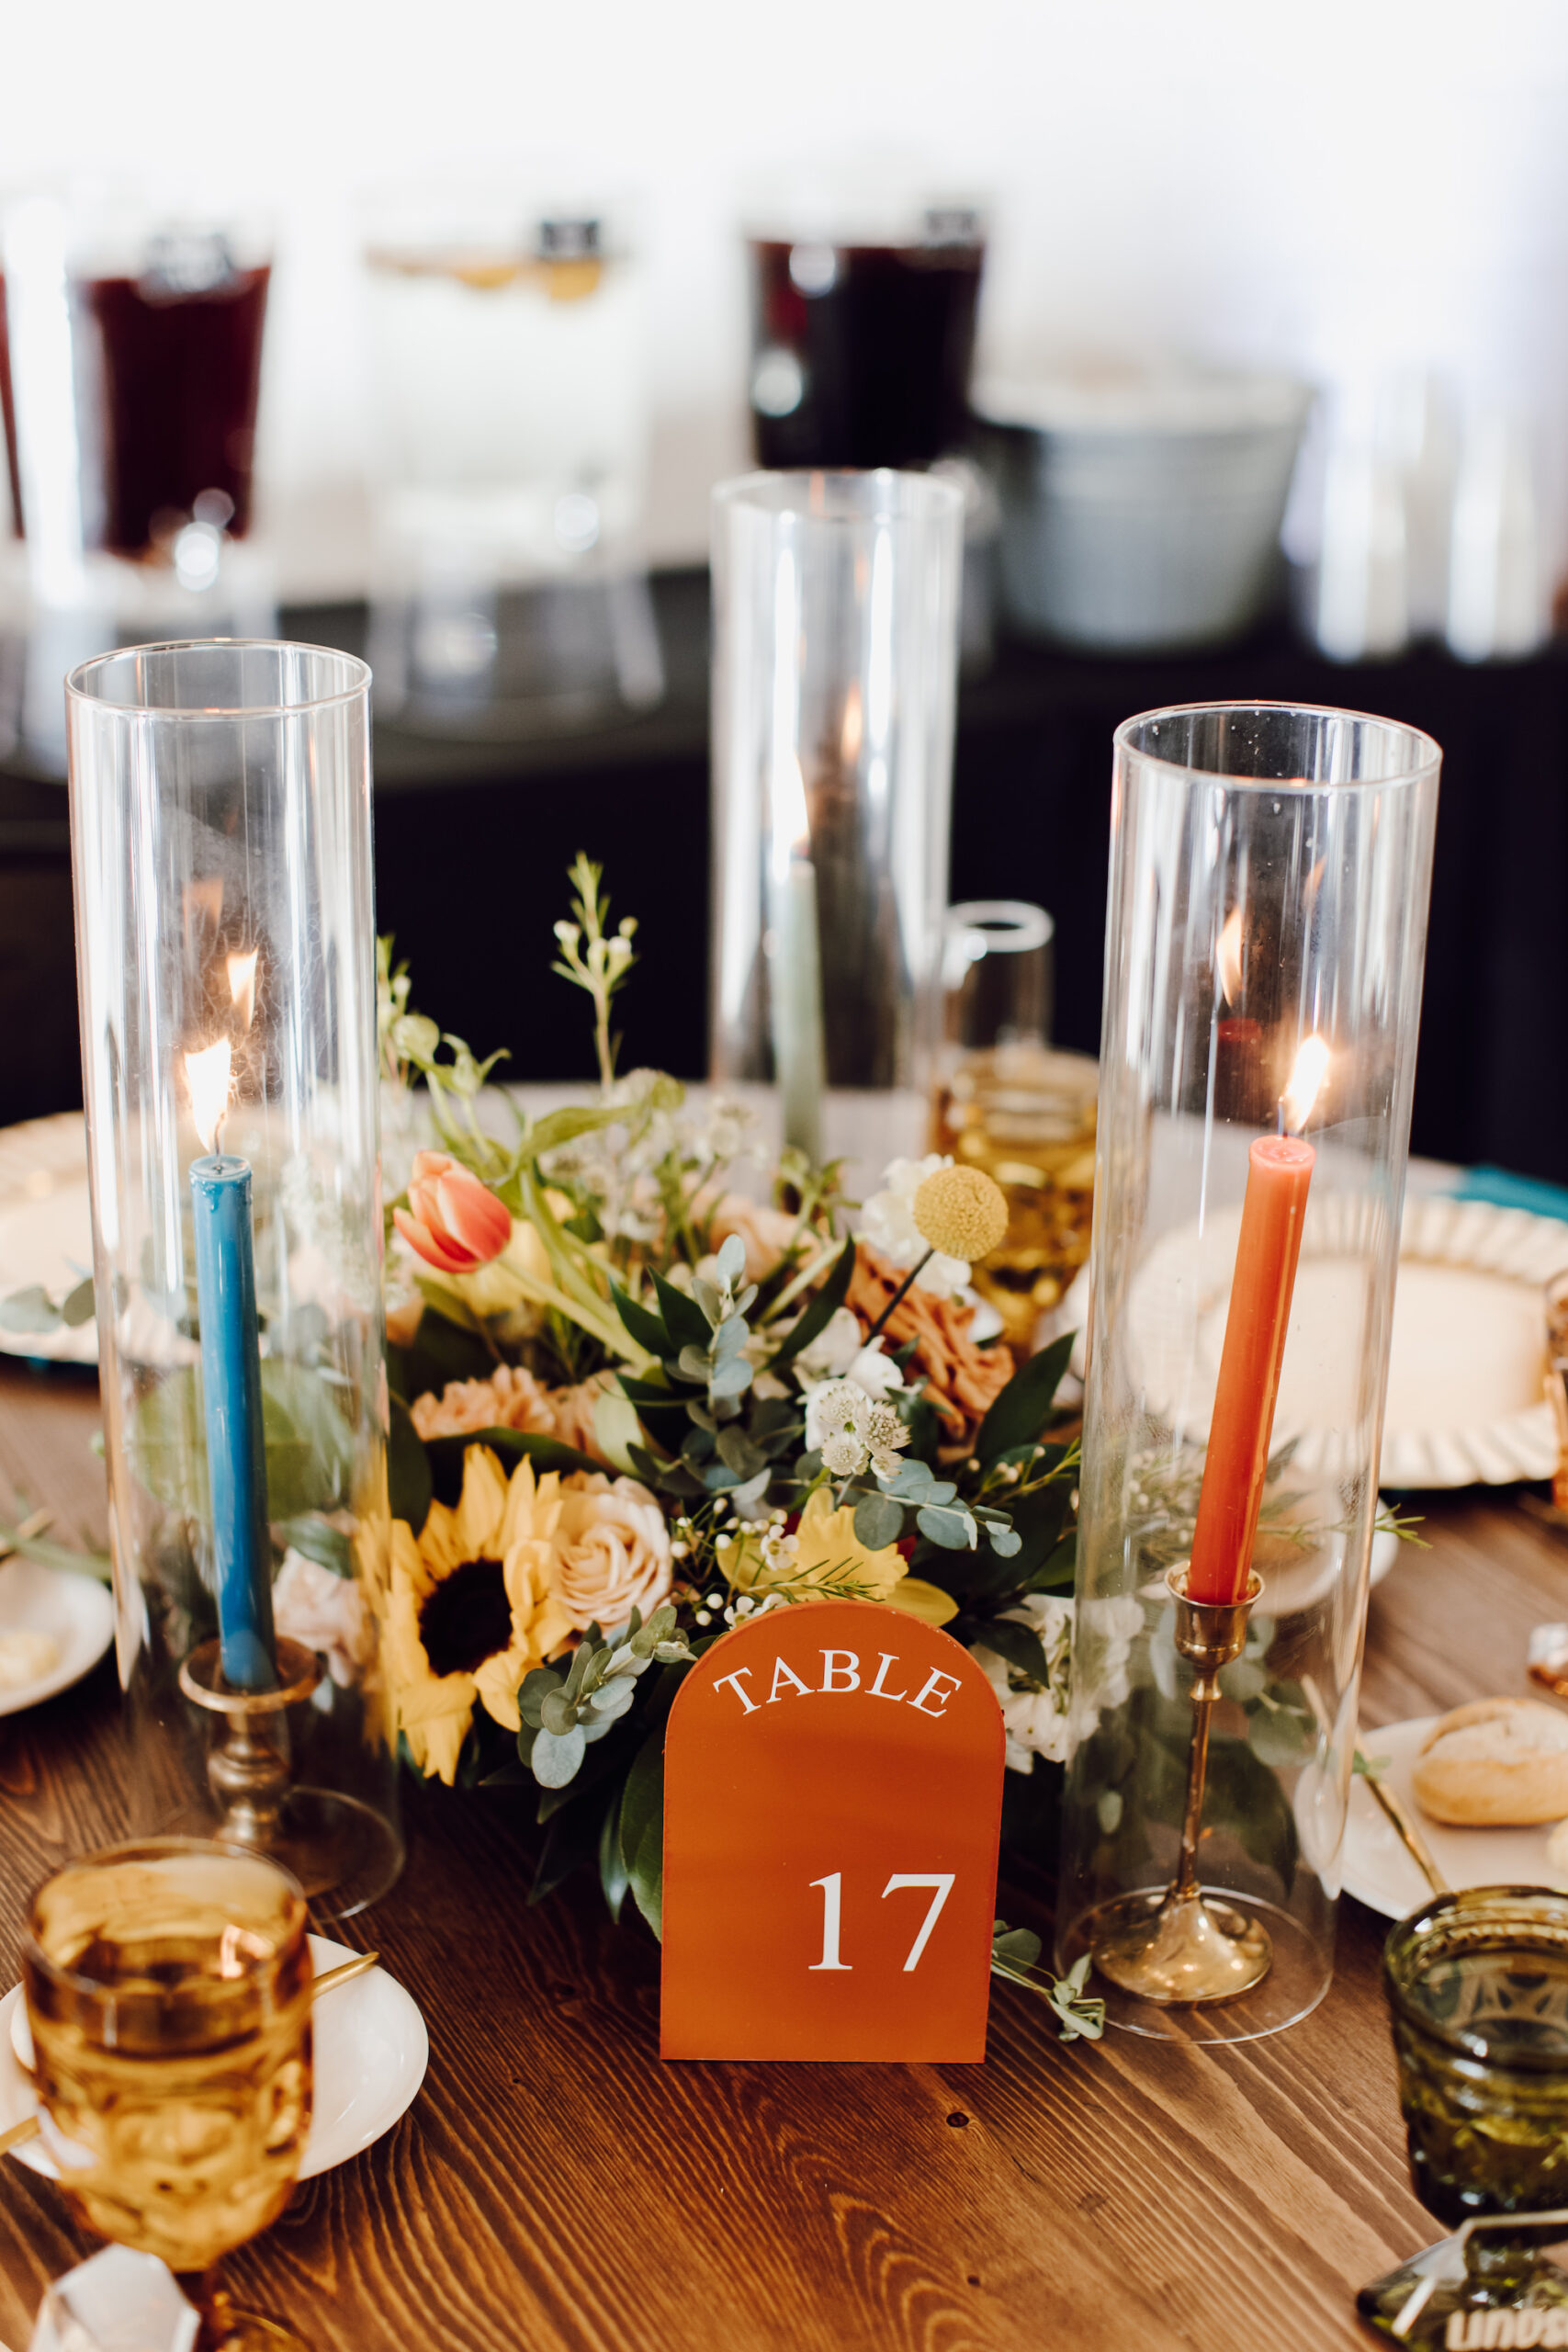 Arch Acrylic Table Numbers | Hurricane Candles with Orange and Blue Taper Candles | Sunflower, Roses, and Greenery Centerpieces Boho Wedding Reception Table Decor Ideas